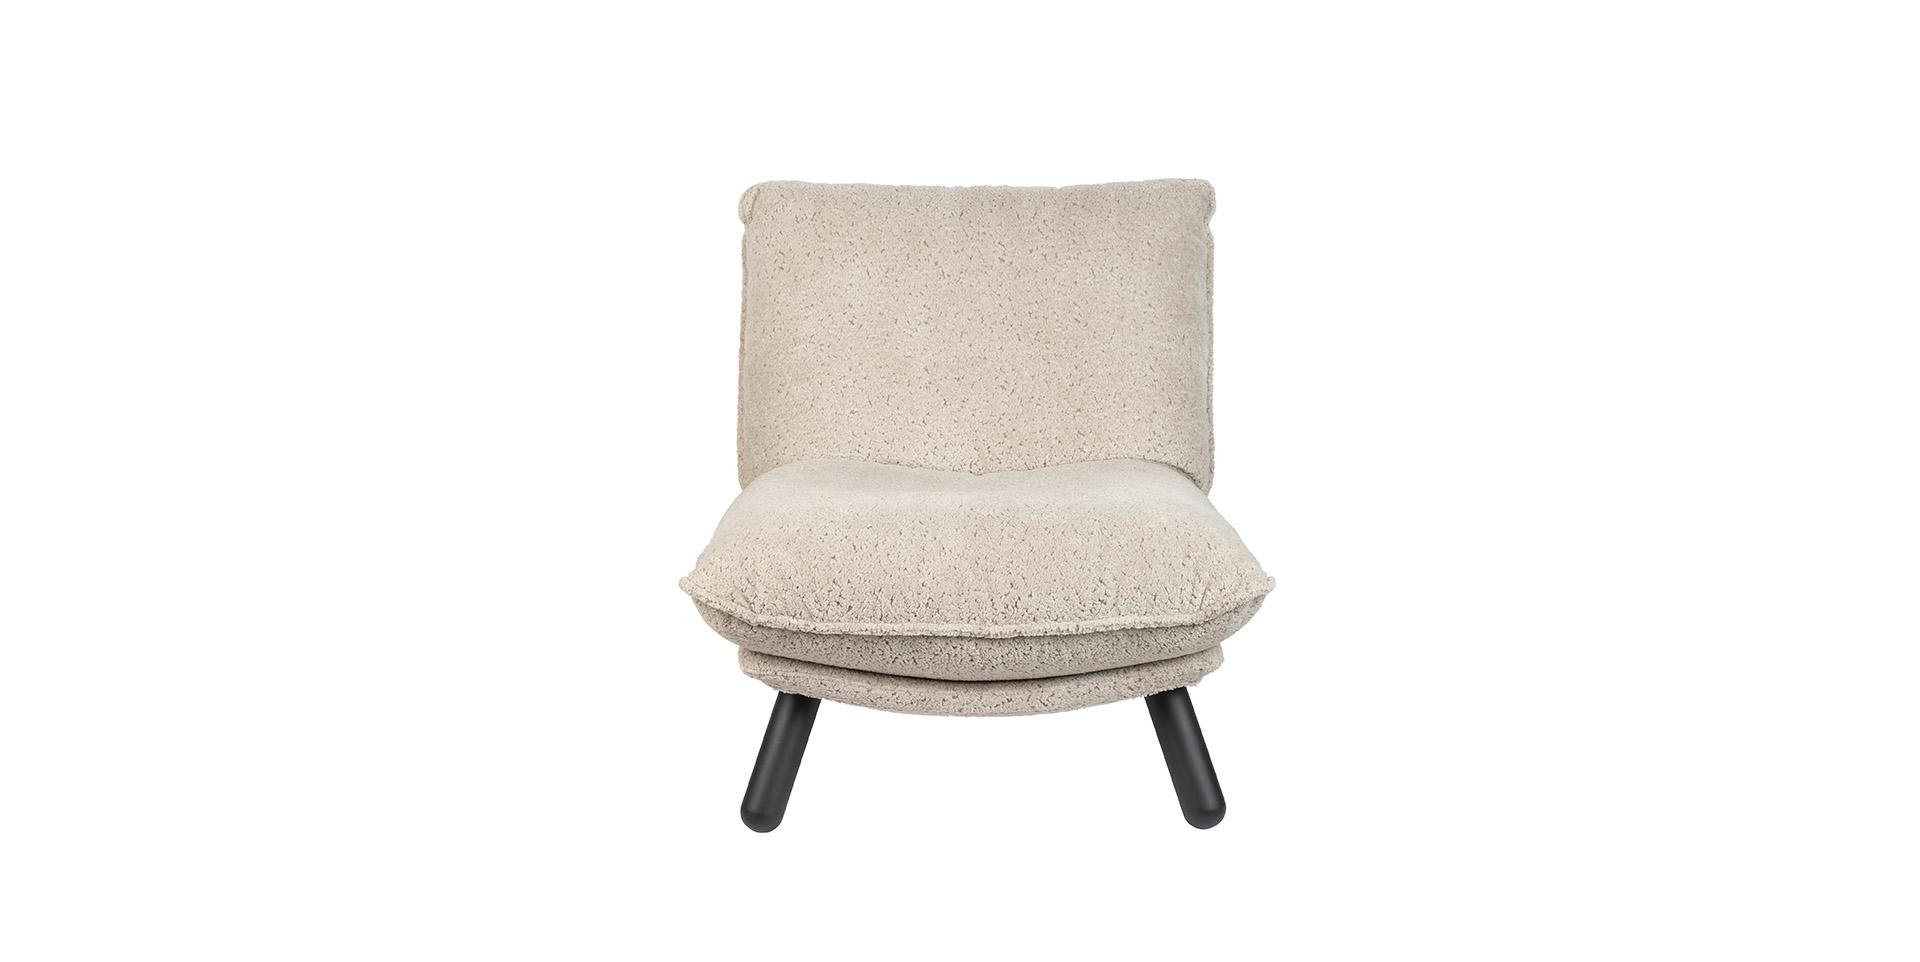 Slider Chaise lounge LAZY SACK TEDDY ZUIVER (image 3)